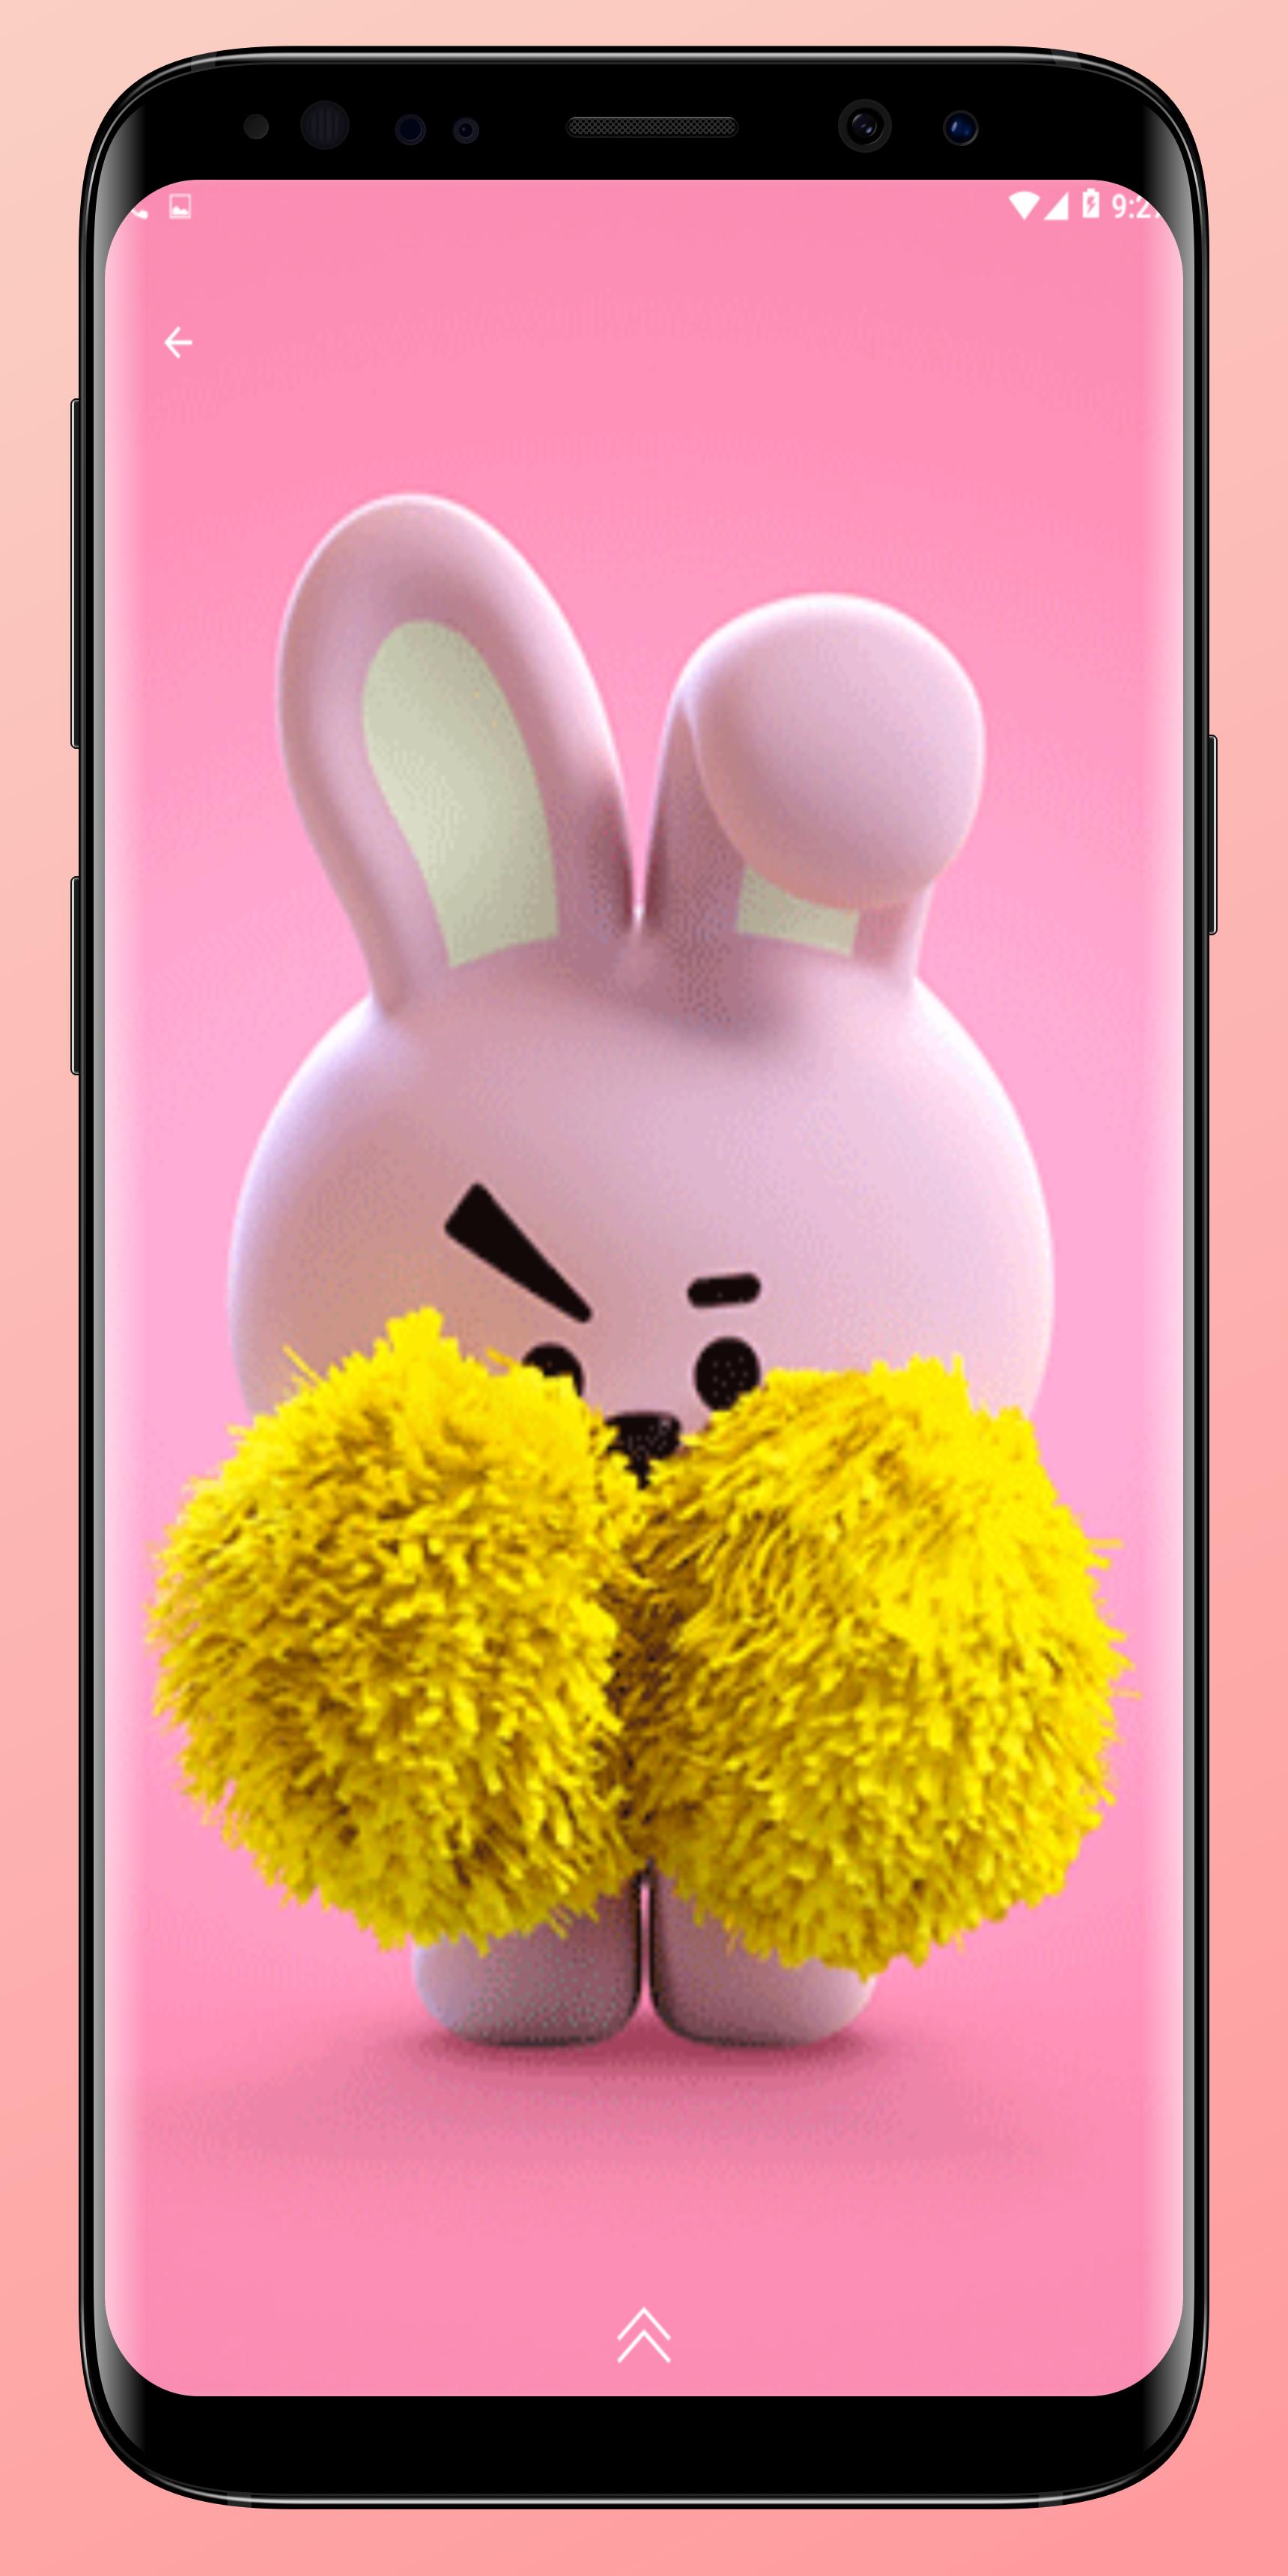 Cute Bt21 Hd Live Wallpaper Backgrounds For Android Apk Download